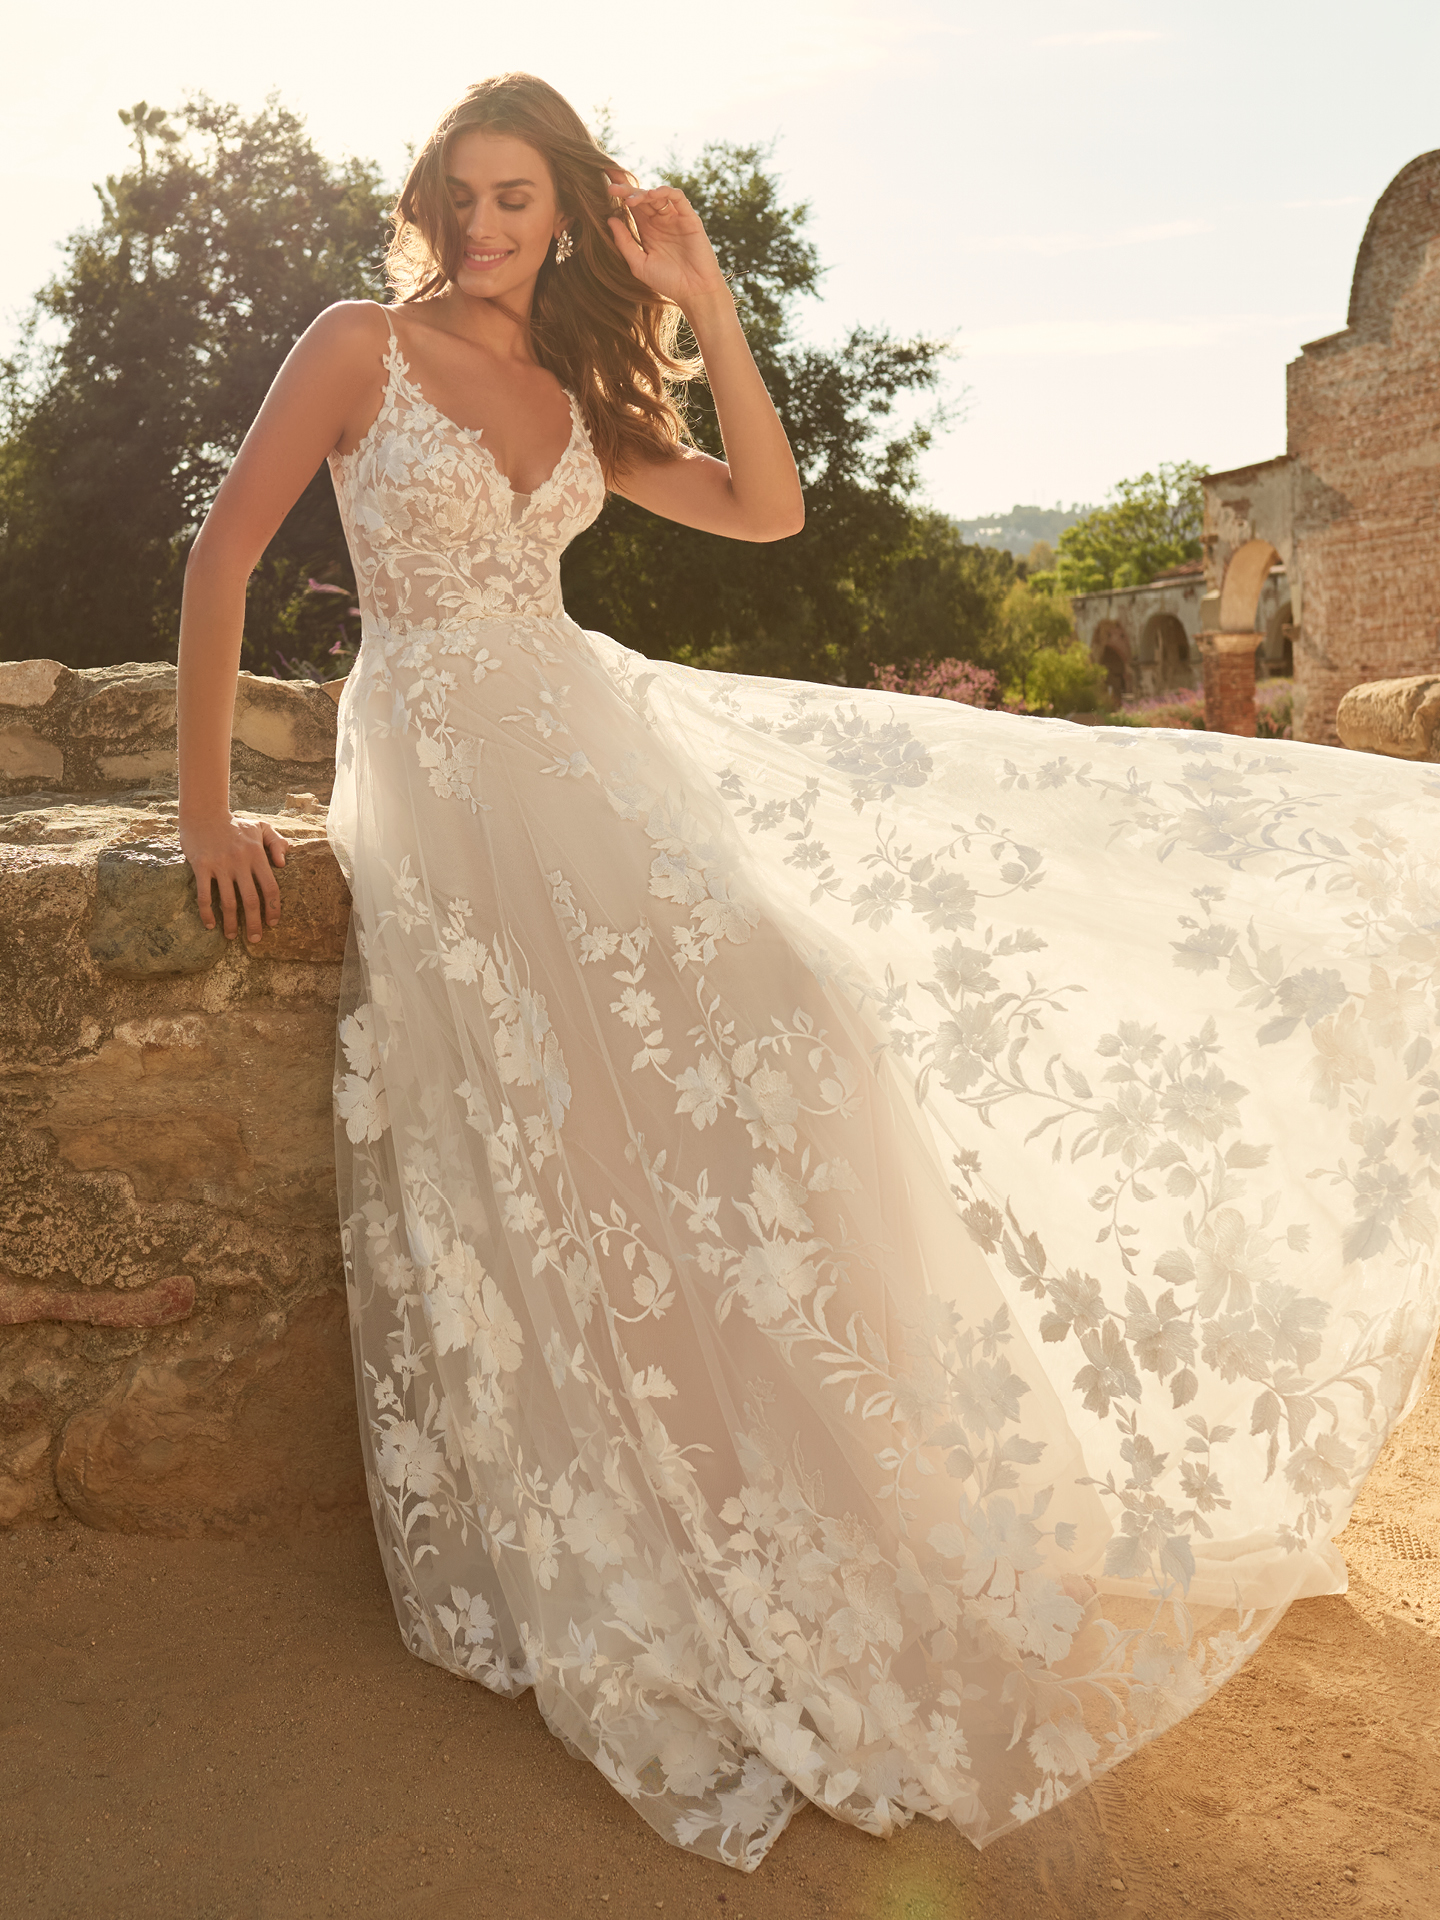 Bride Wearing Lace A-Line Wedding Dress Called Winter by Maggie Sottero